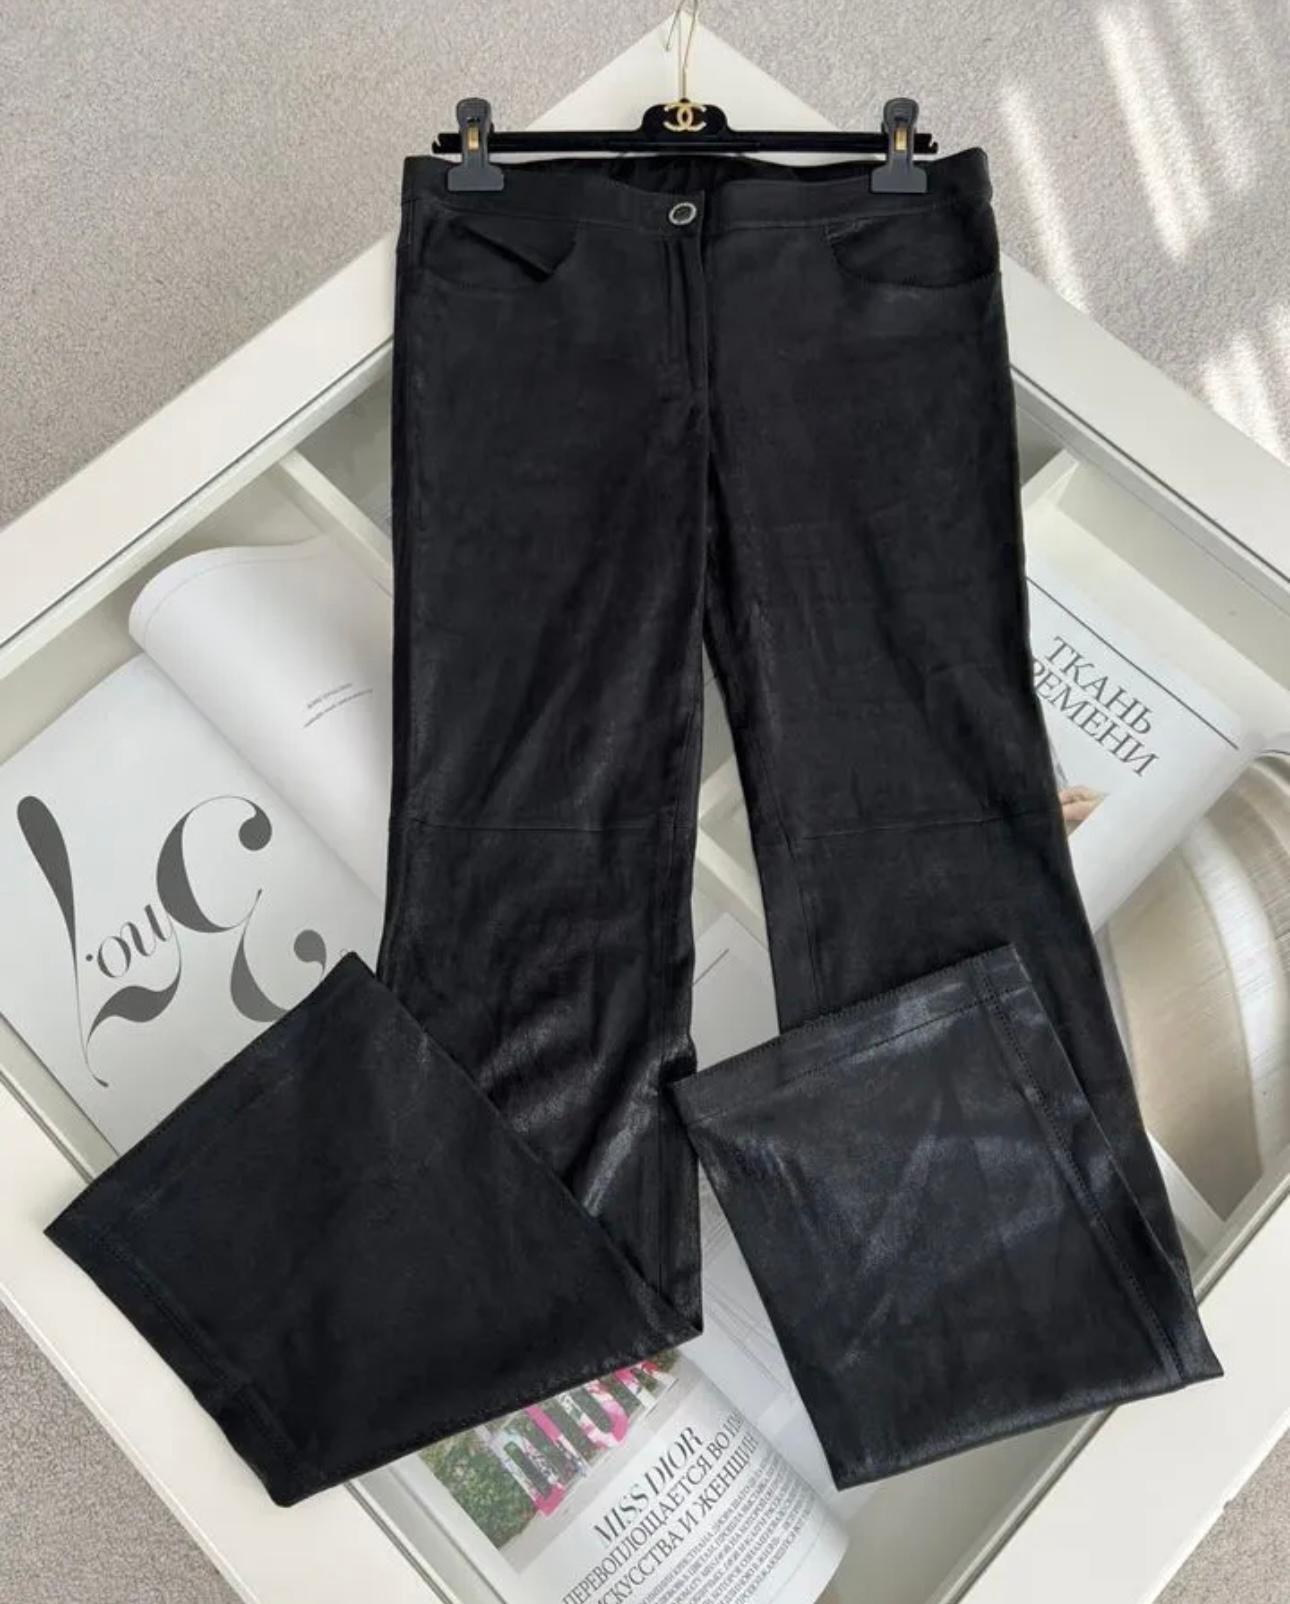 Chanel Paris in Rome Runway Leather Flare Trousers In Excellent Condition For Sale In Dubai, AE